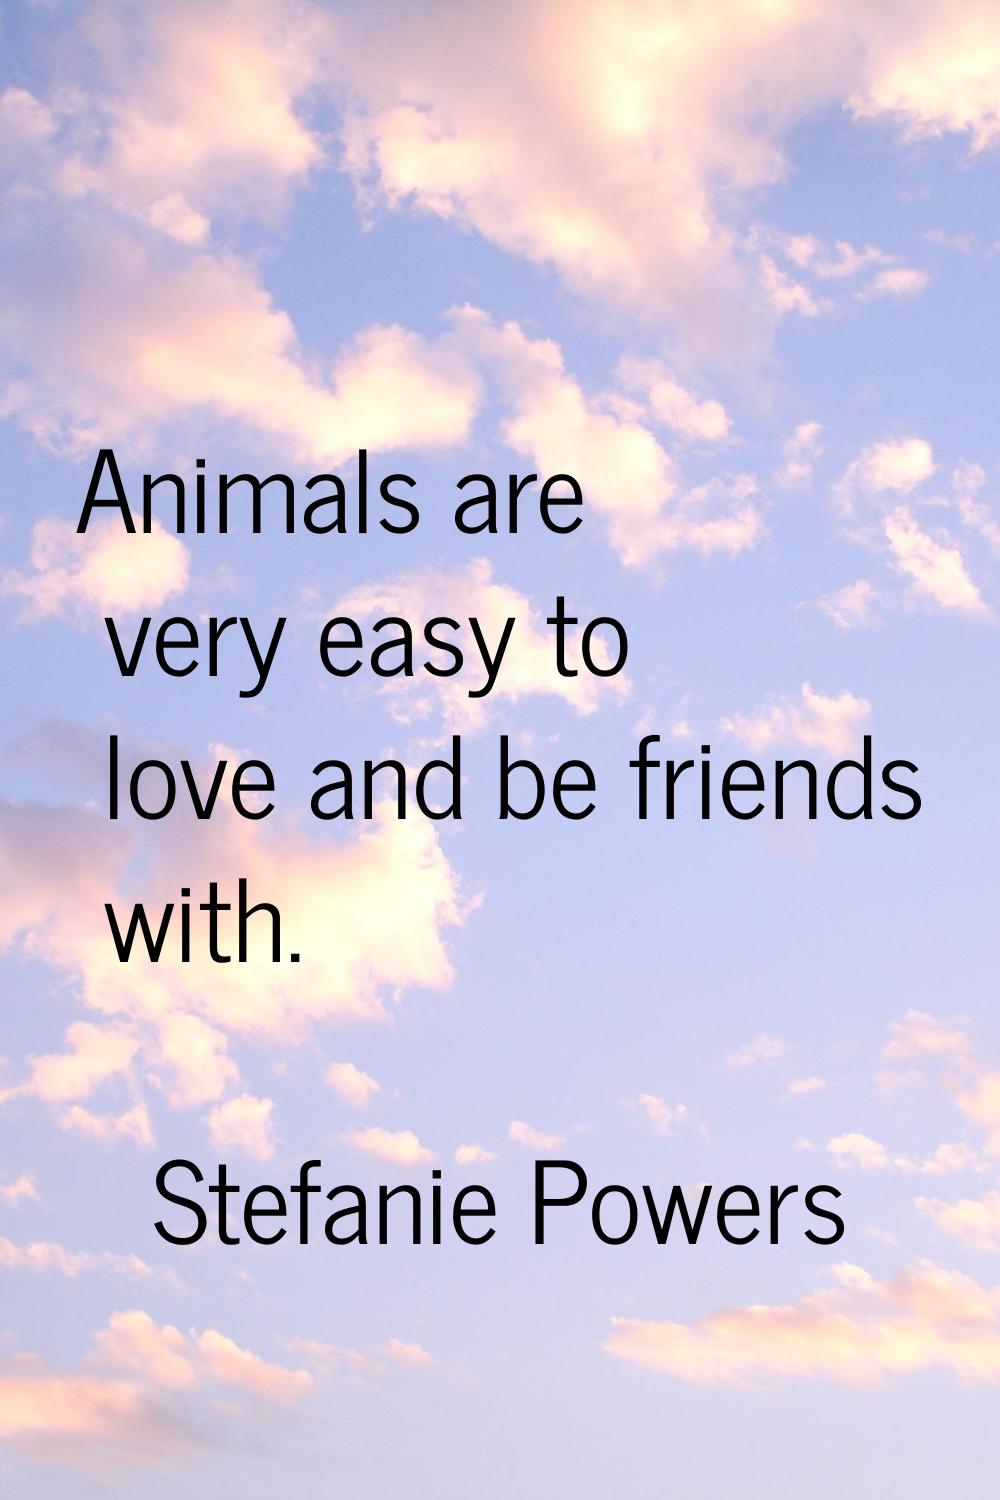 Animals are very easy to love and be friends with.